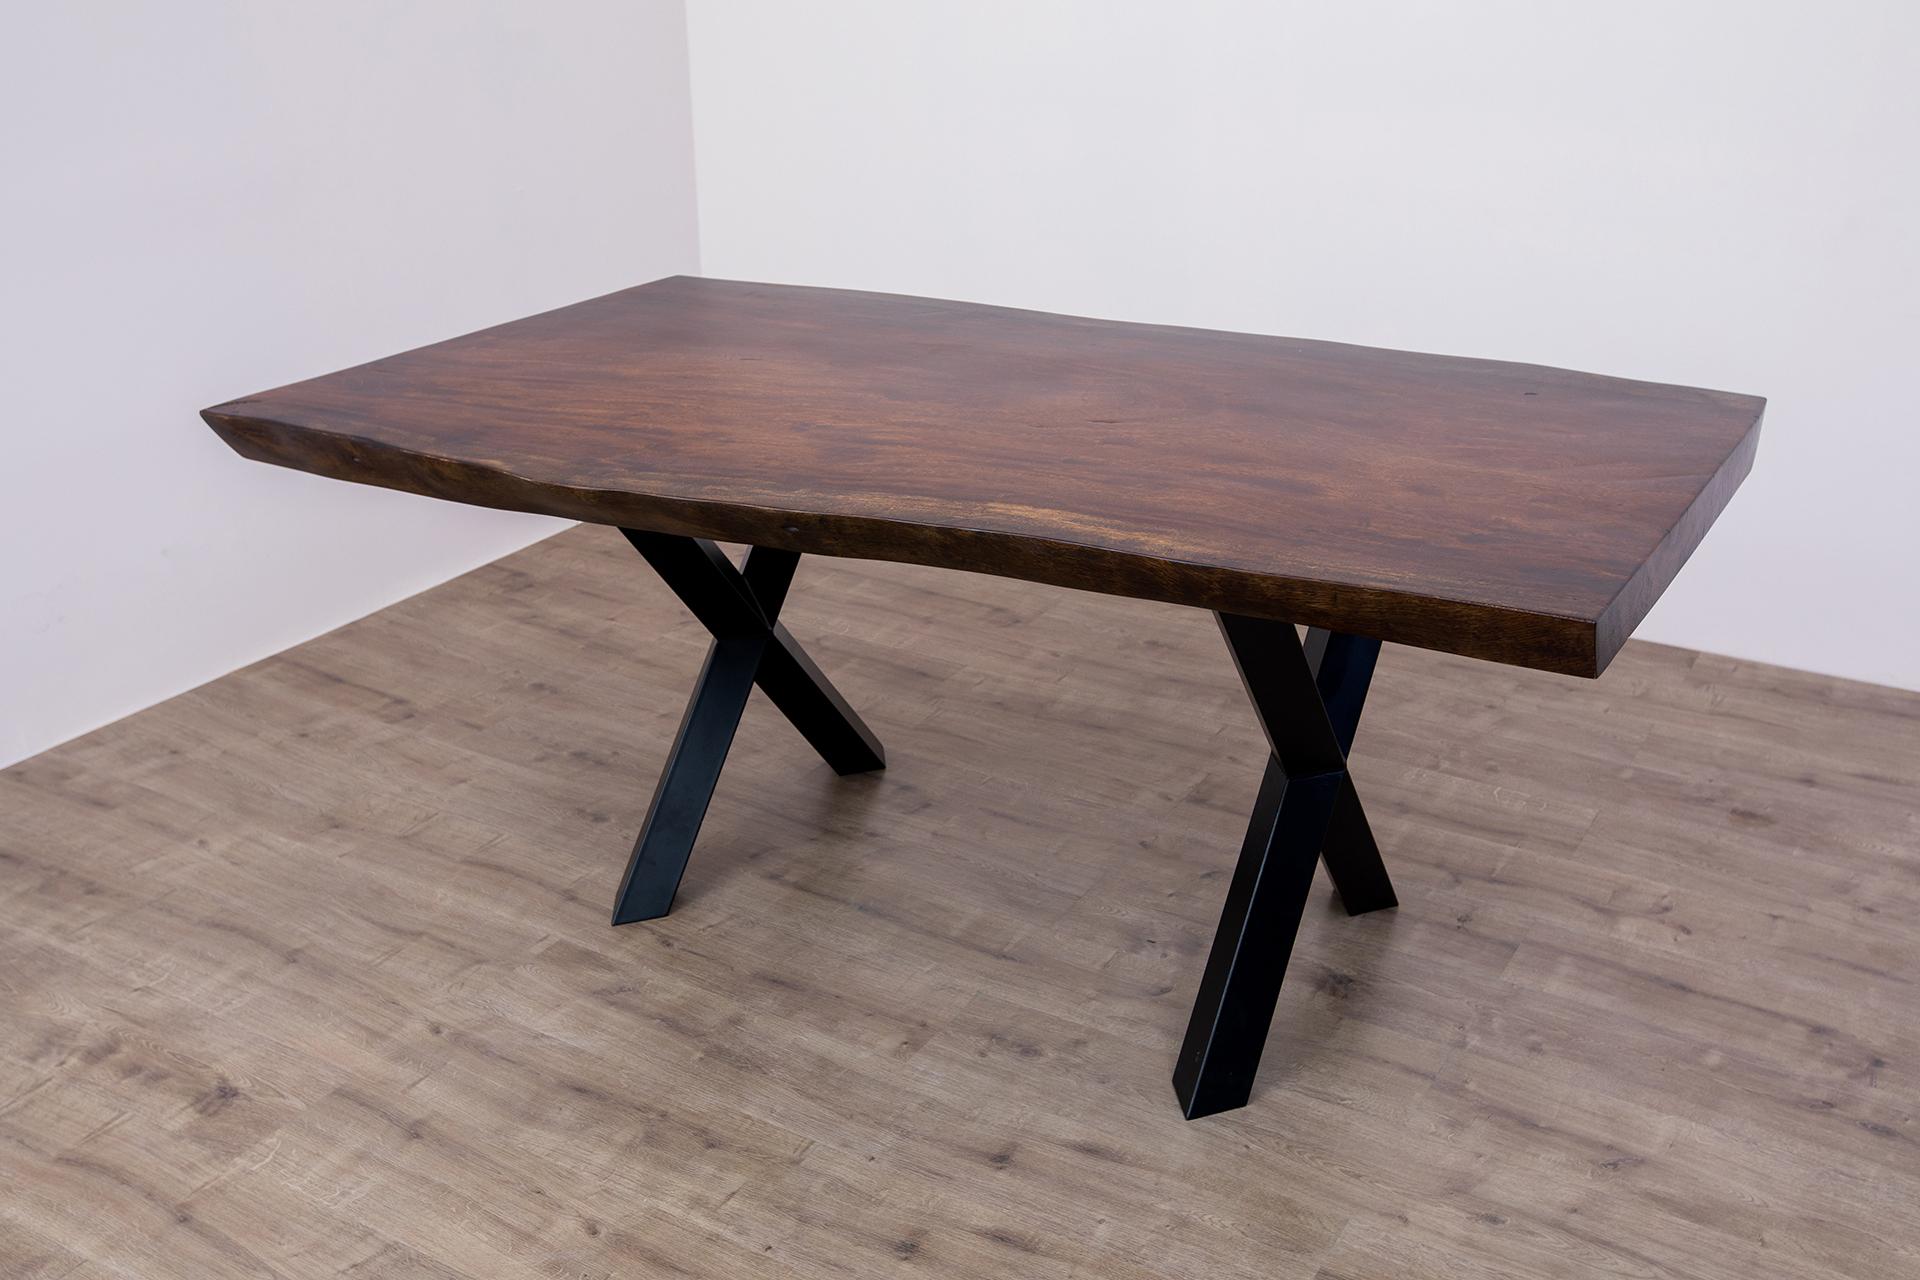 Acacia Live Edge Limited Edition Slab Table in Smooth Dark Chocolate In New Condition For Sale In Boulder, CO